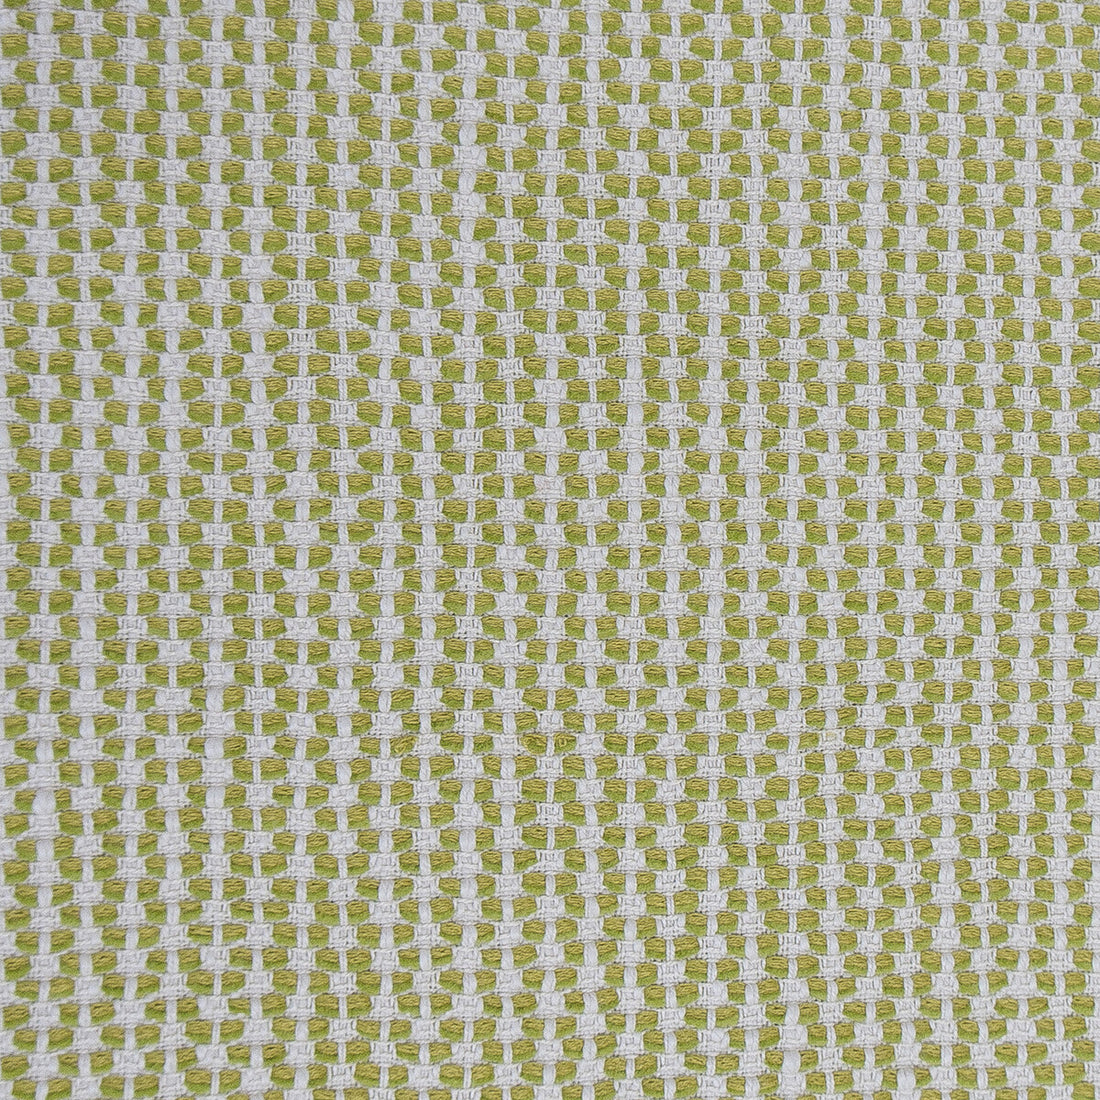 Palenque fabric in lima color - pattern GDT5595.003.0 - by Gaston y Daniela in the Gaston Nuevo Mundo collection